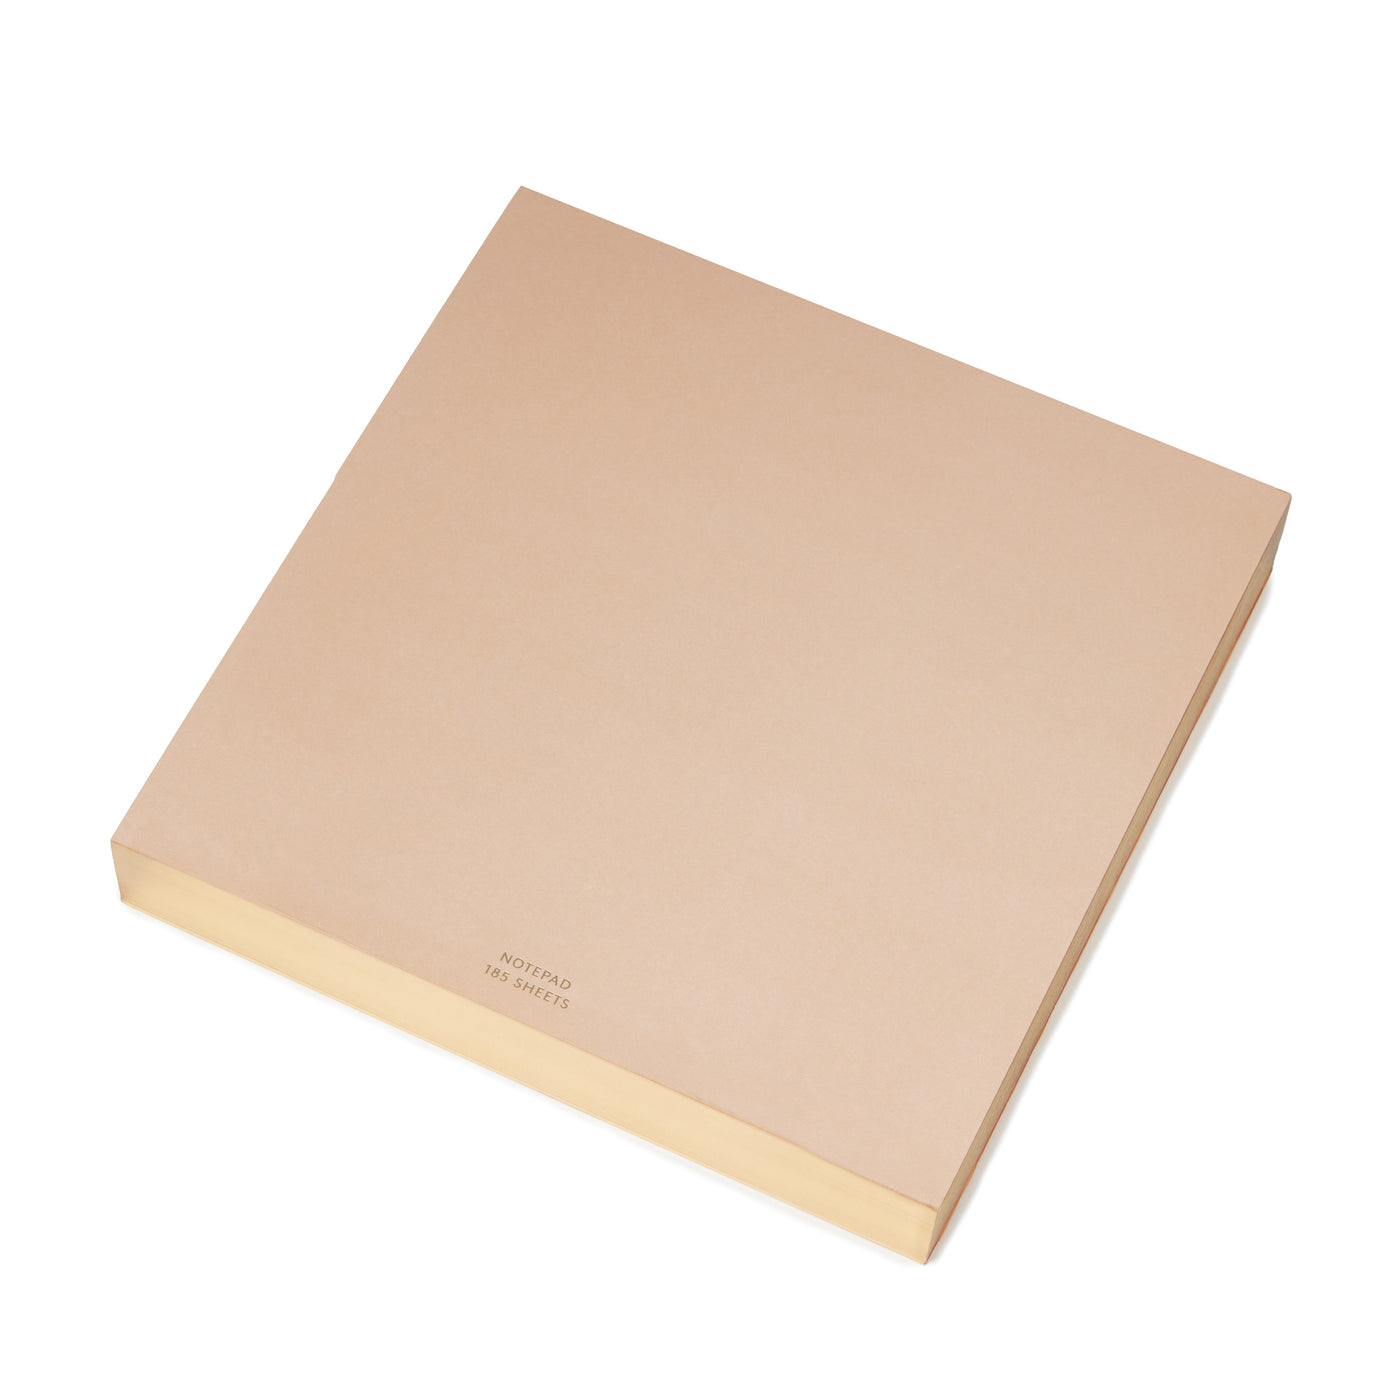 Large Square Color Pad in Blush with Gold Edge